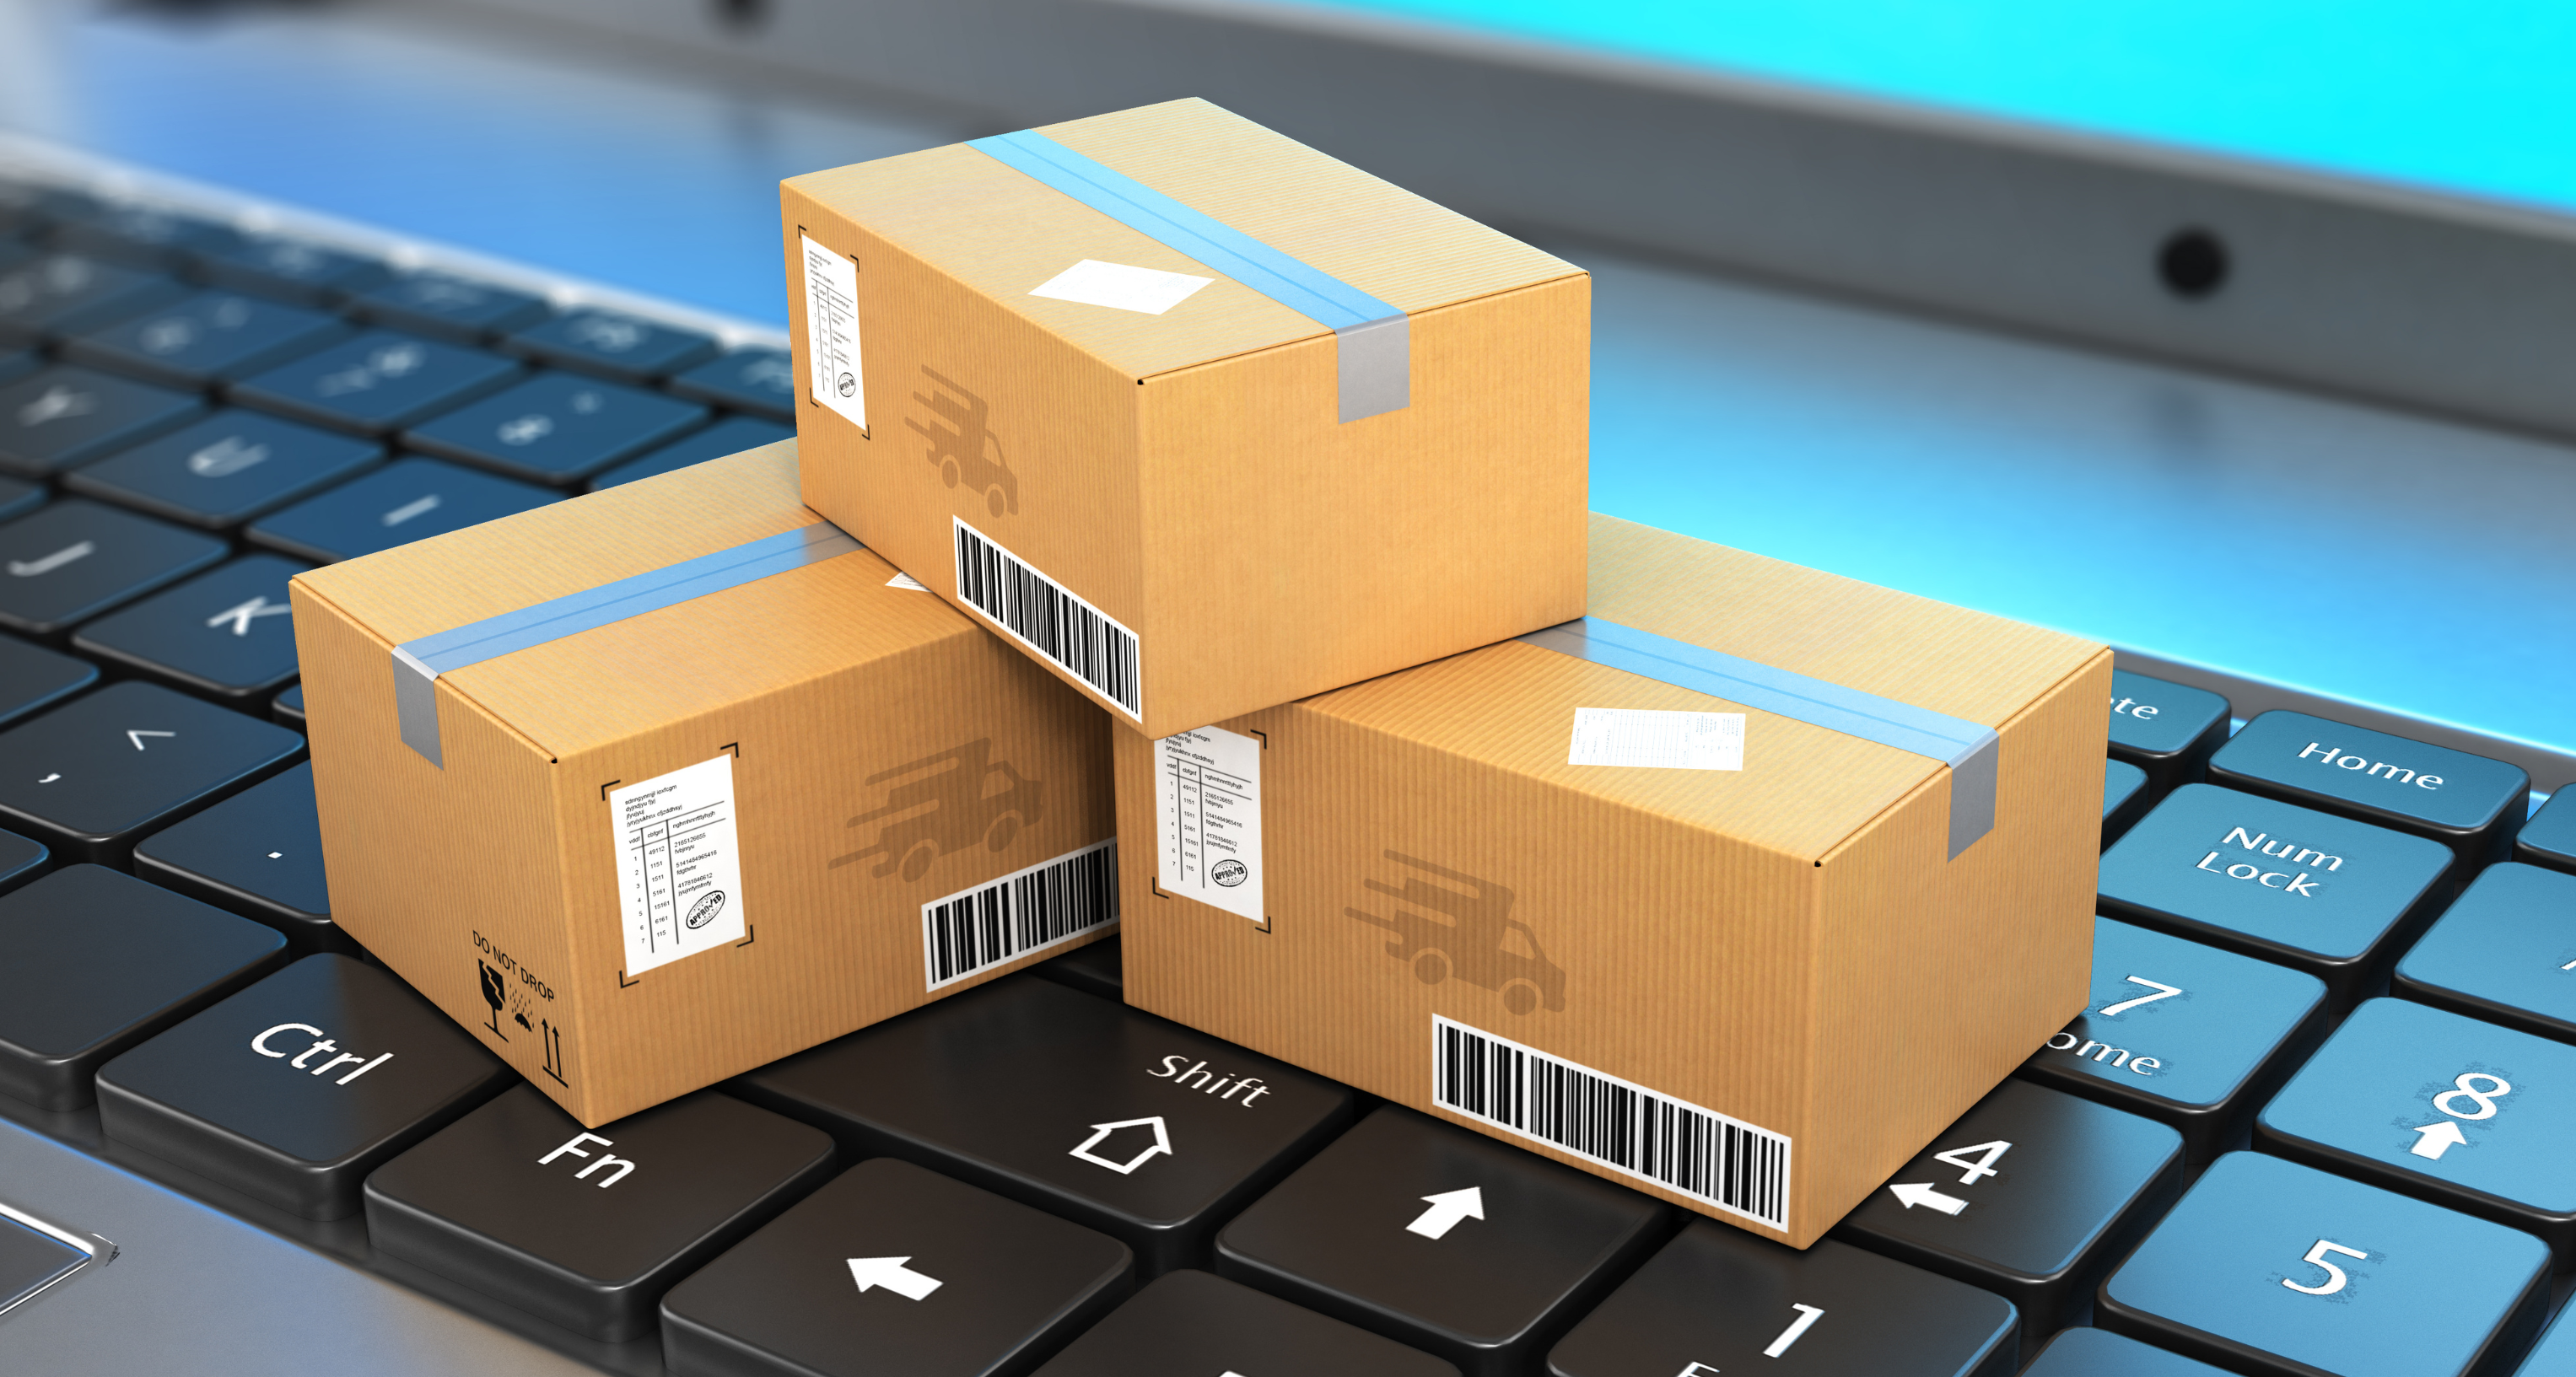 Last minute delivery in ecommerce fulfillment in Singapore